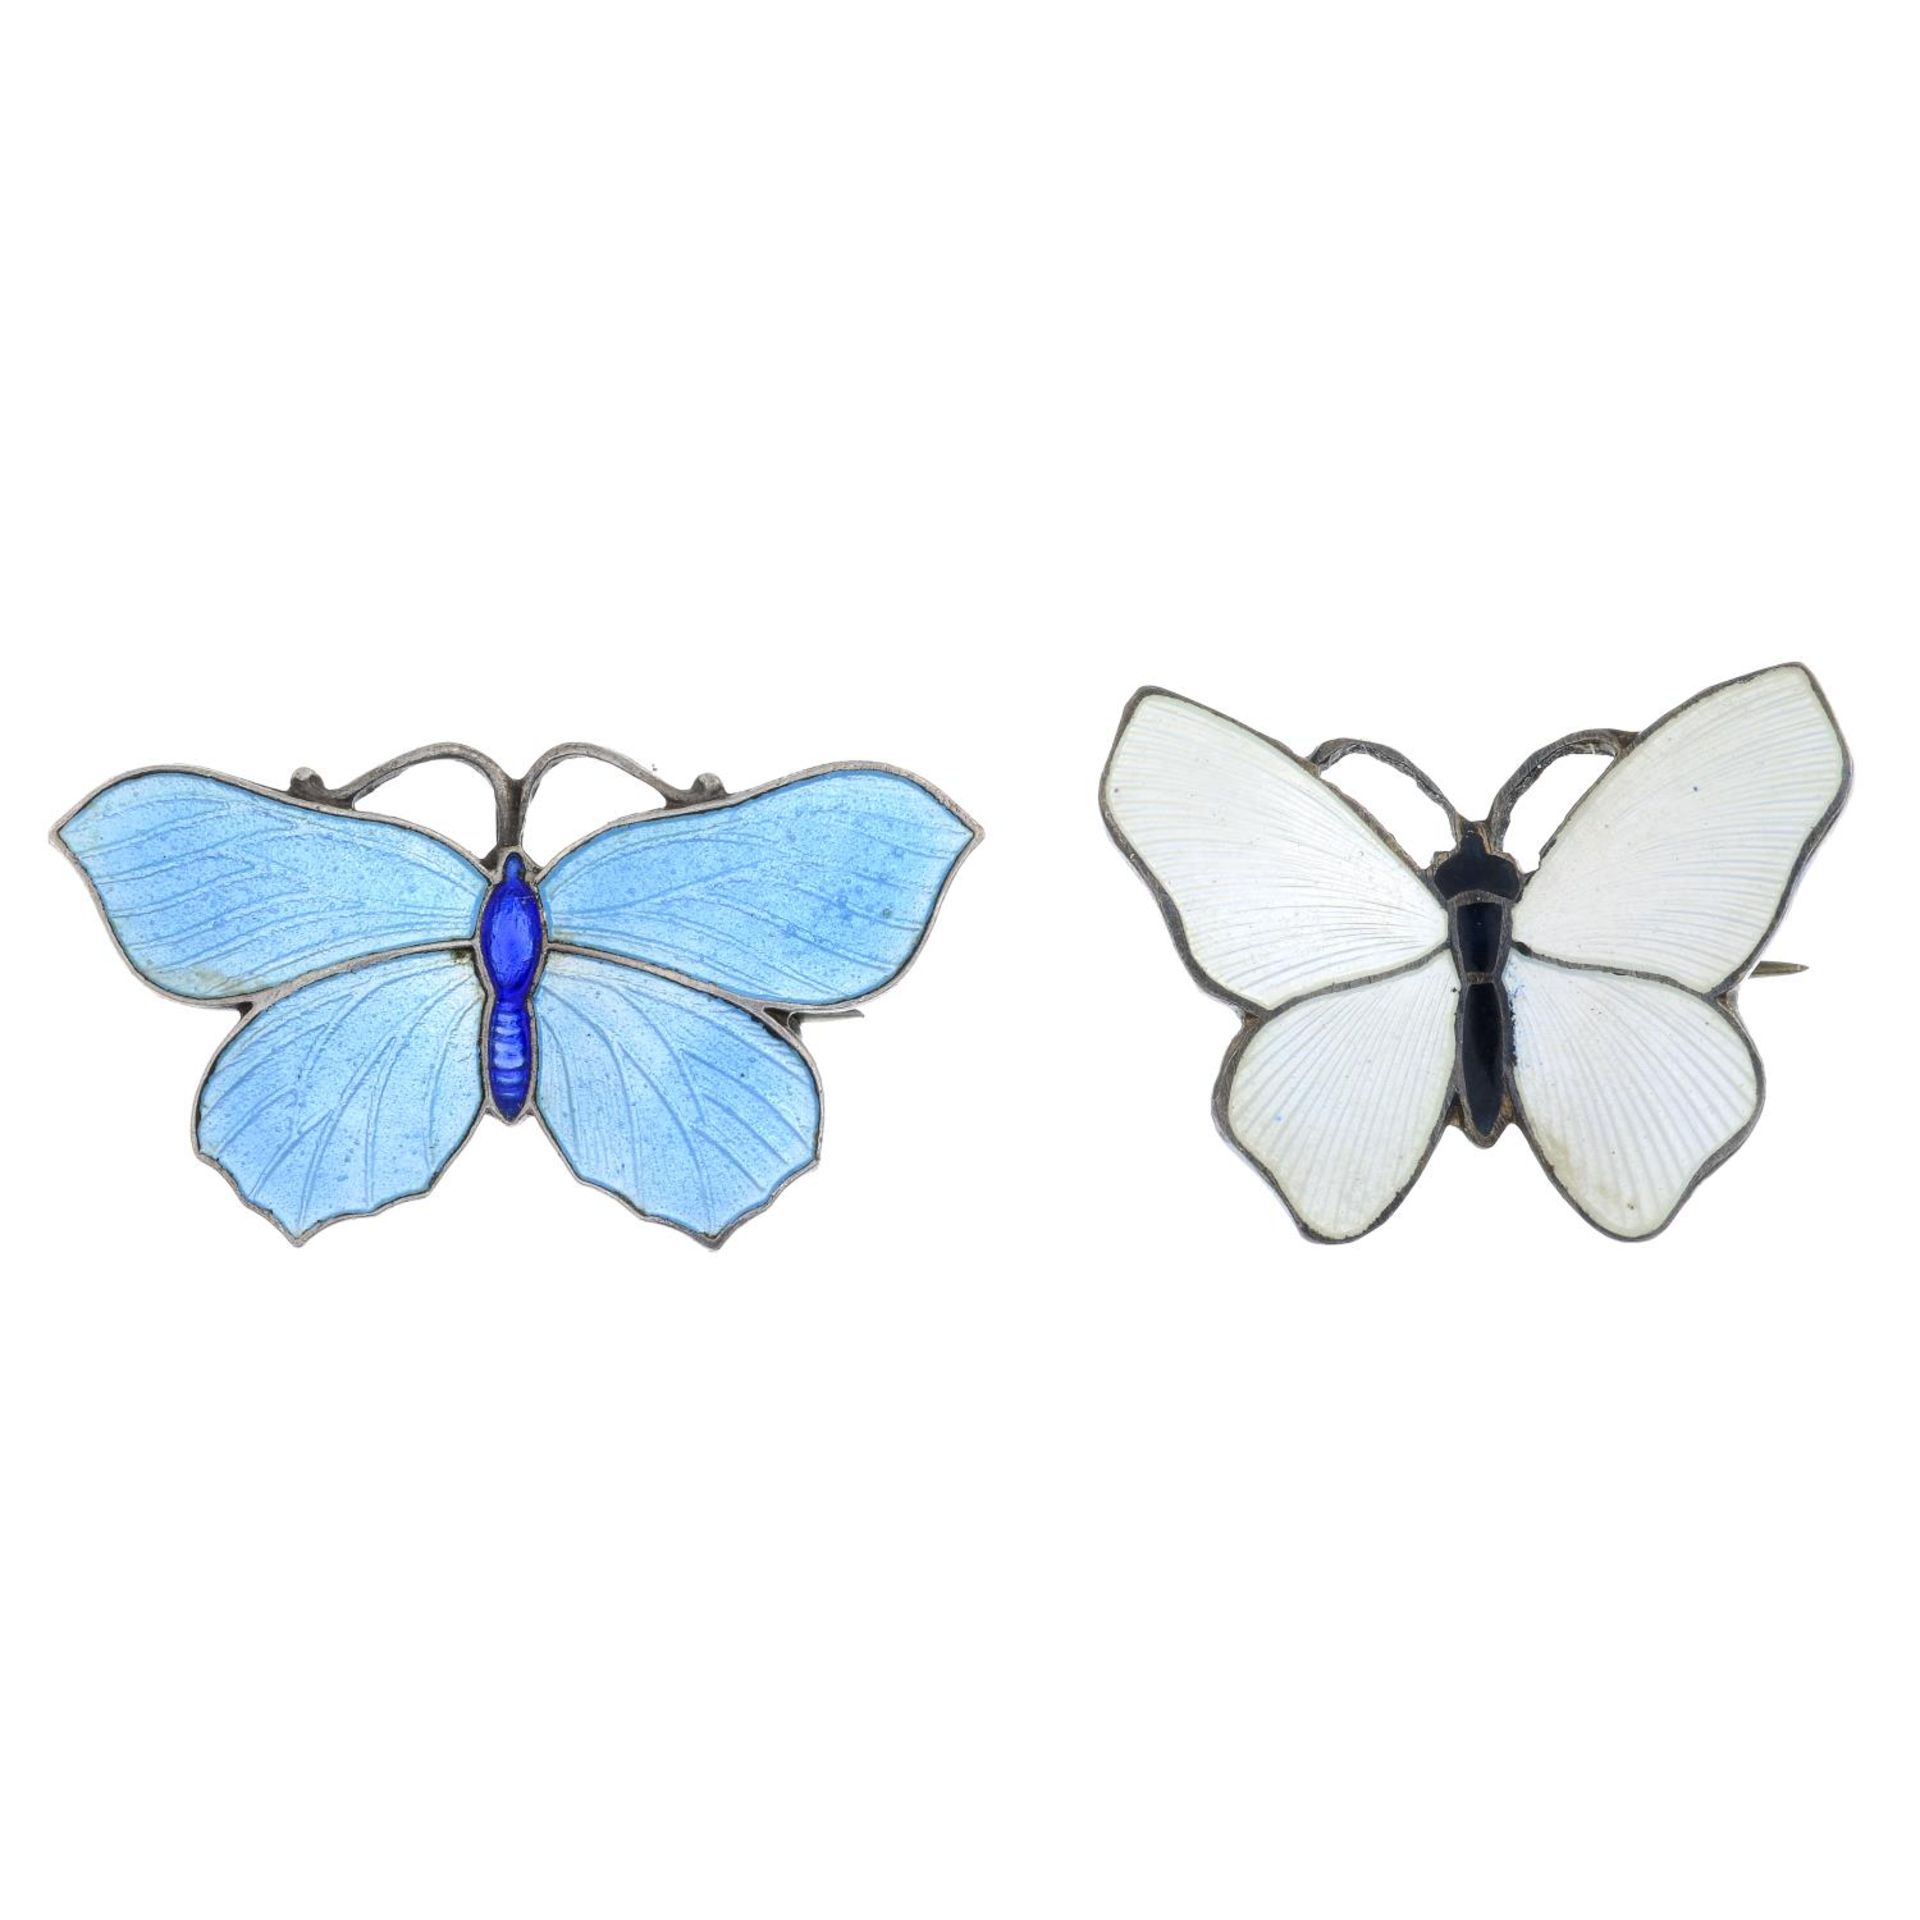 Two enamel butterfly brooches, one by John Atkins & Sons.